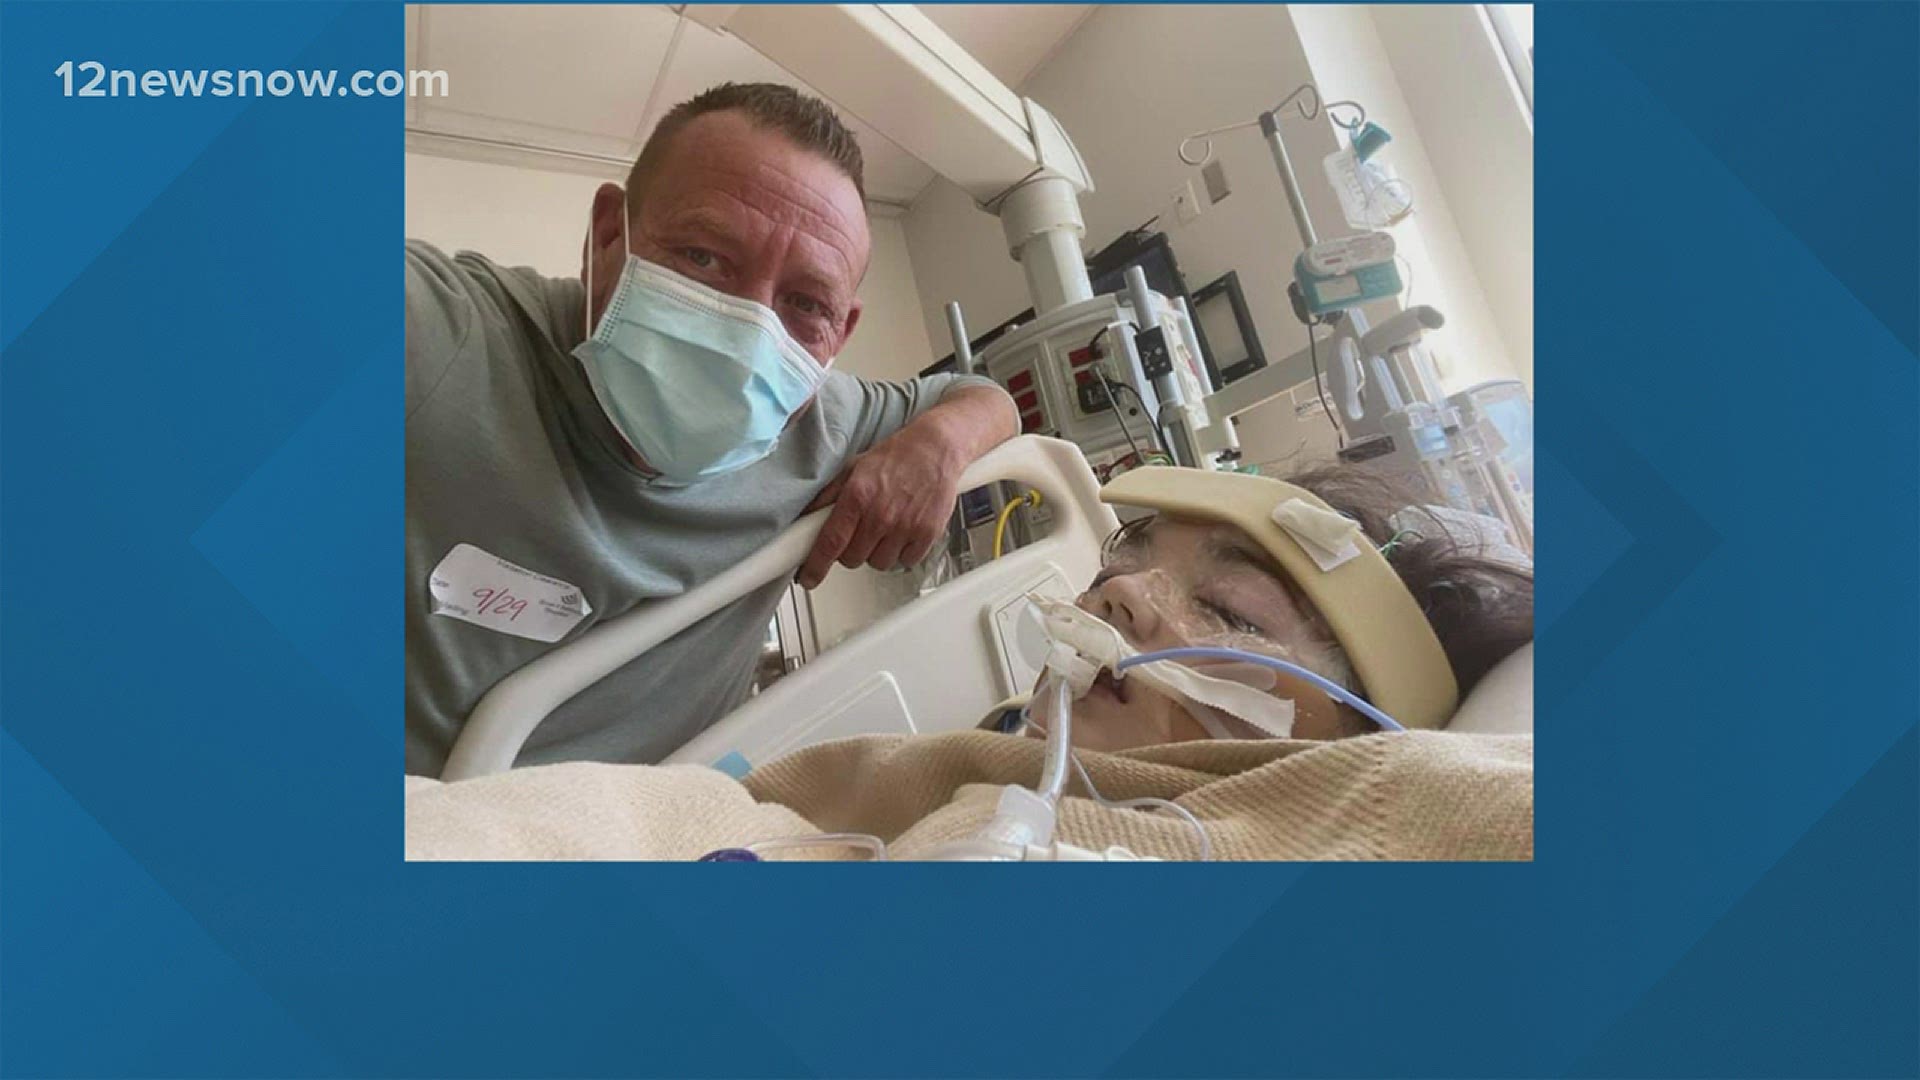 Kevin Swearingen is finally by his daughter's side after the Houston hospital changed its policy